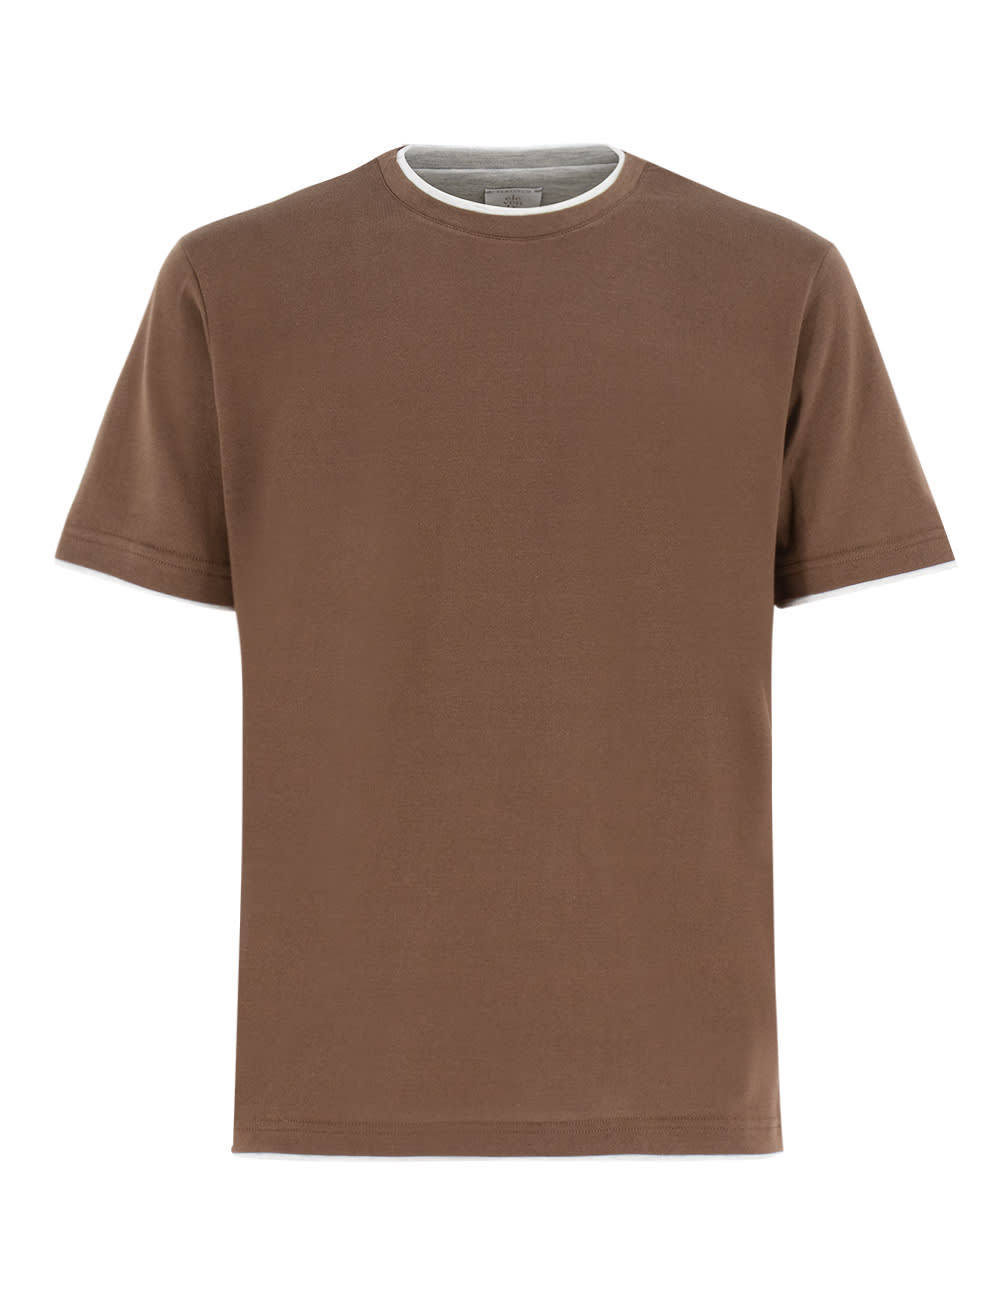 Eleventy T-shirt In Brown And Light Grey